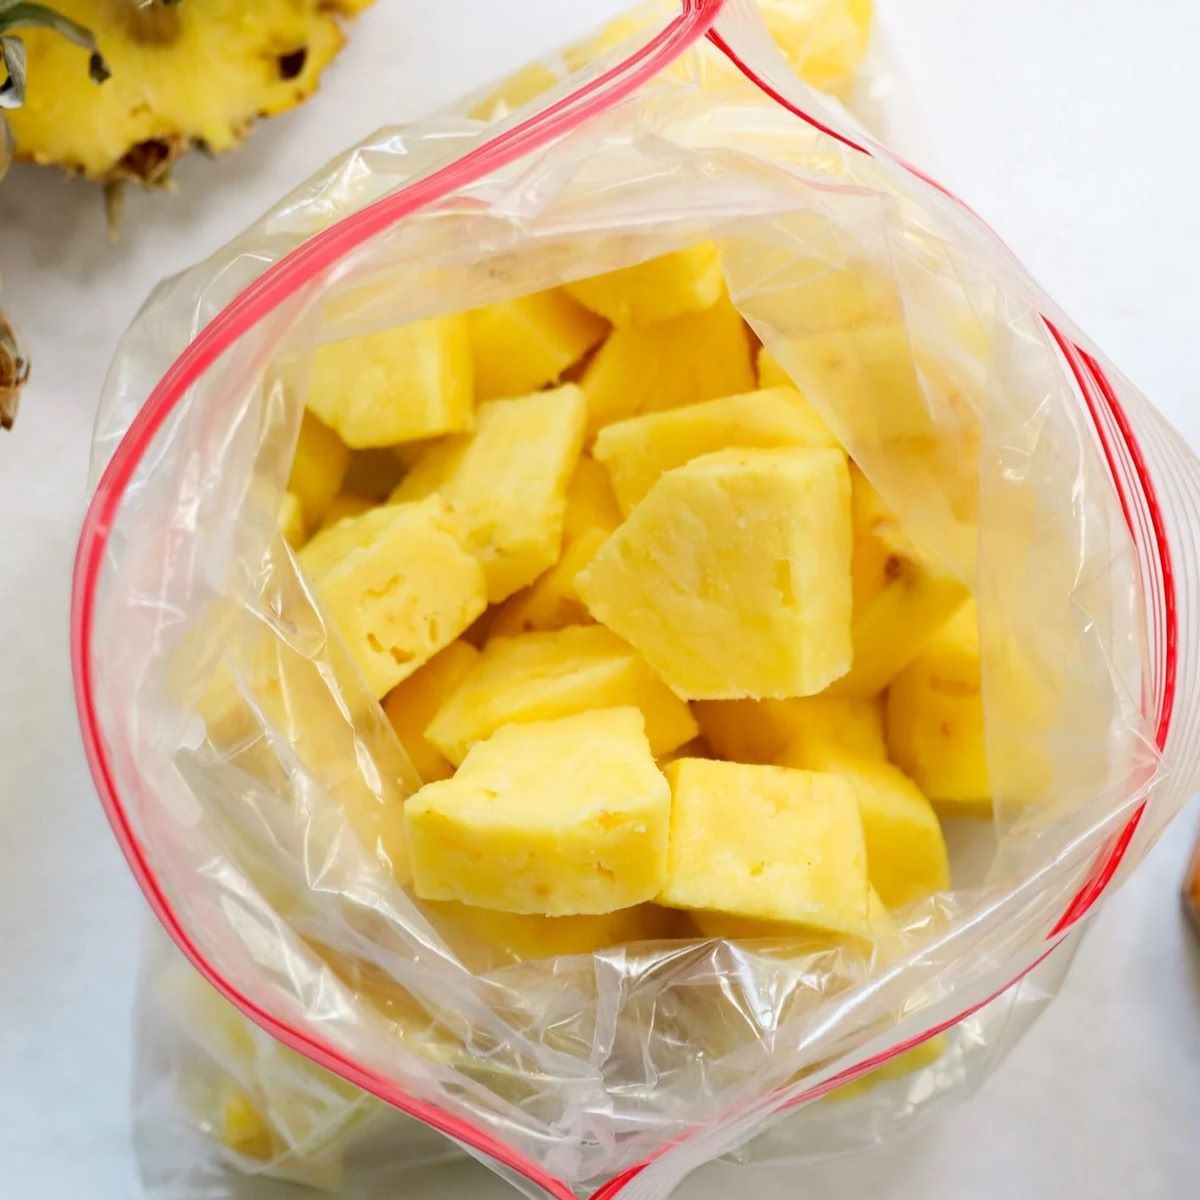 How To Store Pineapple In Freezer